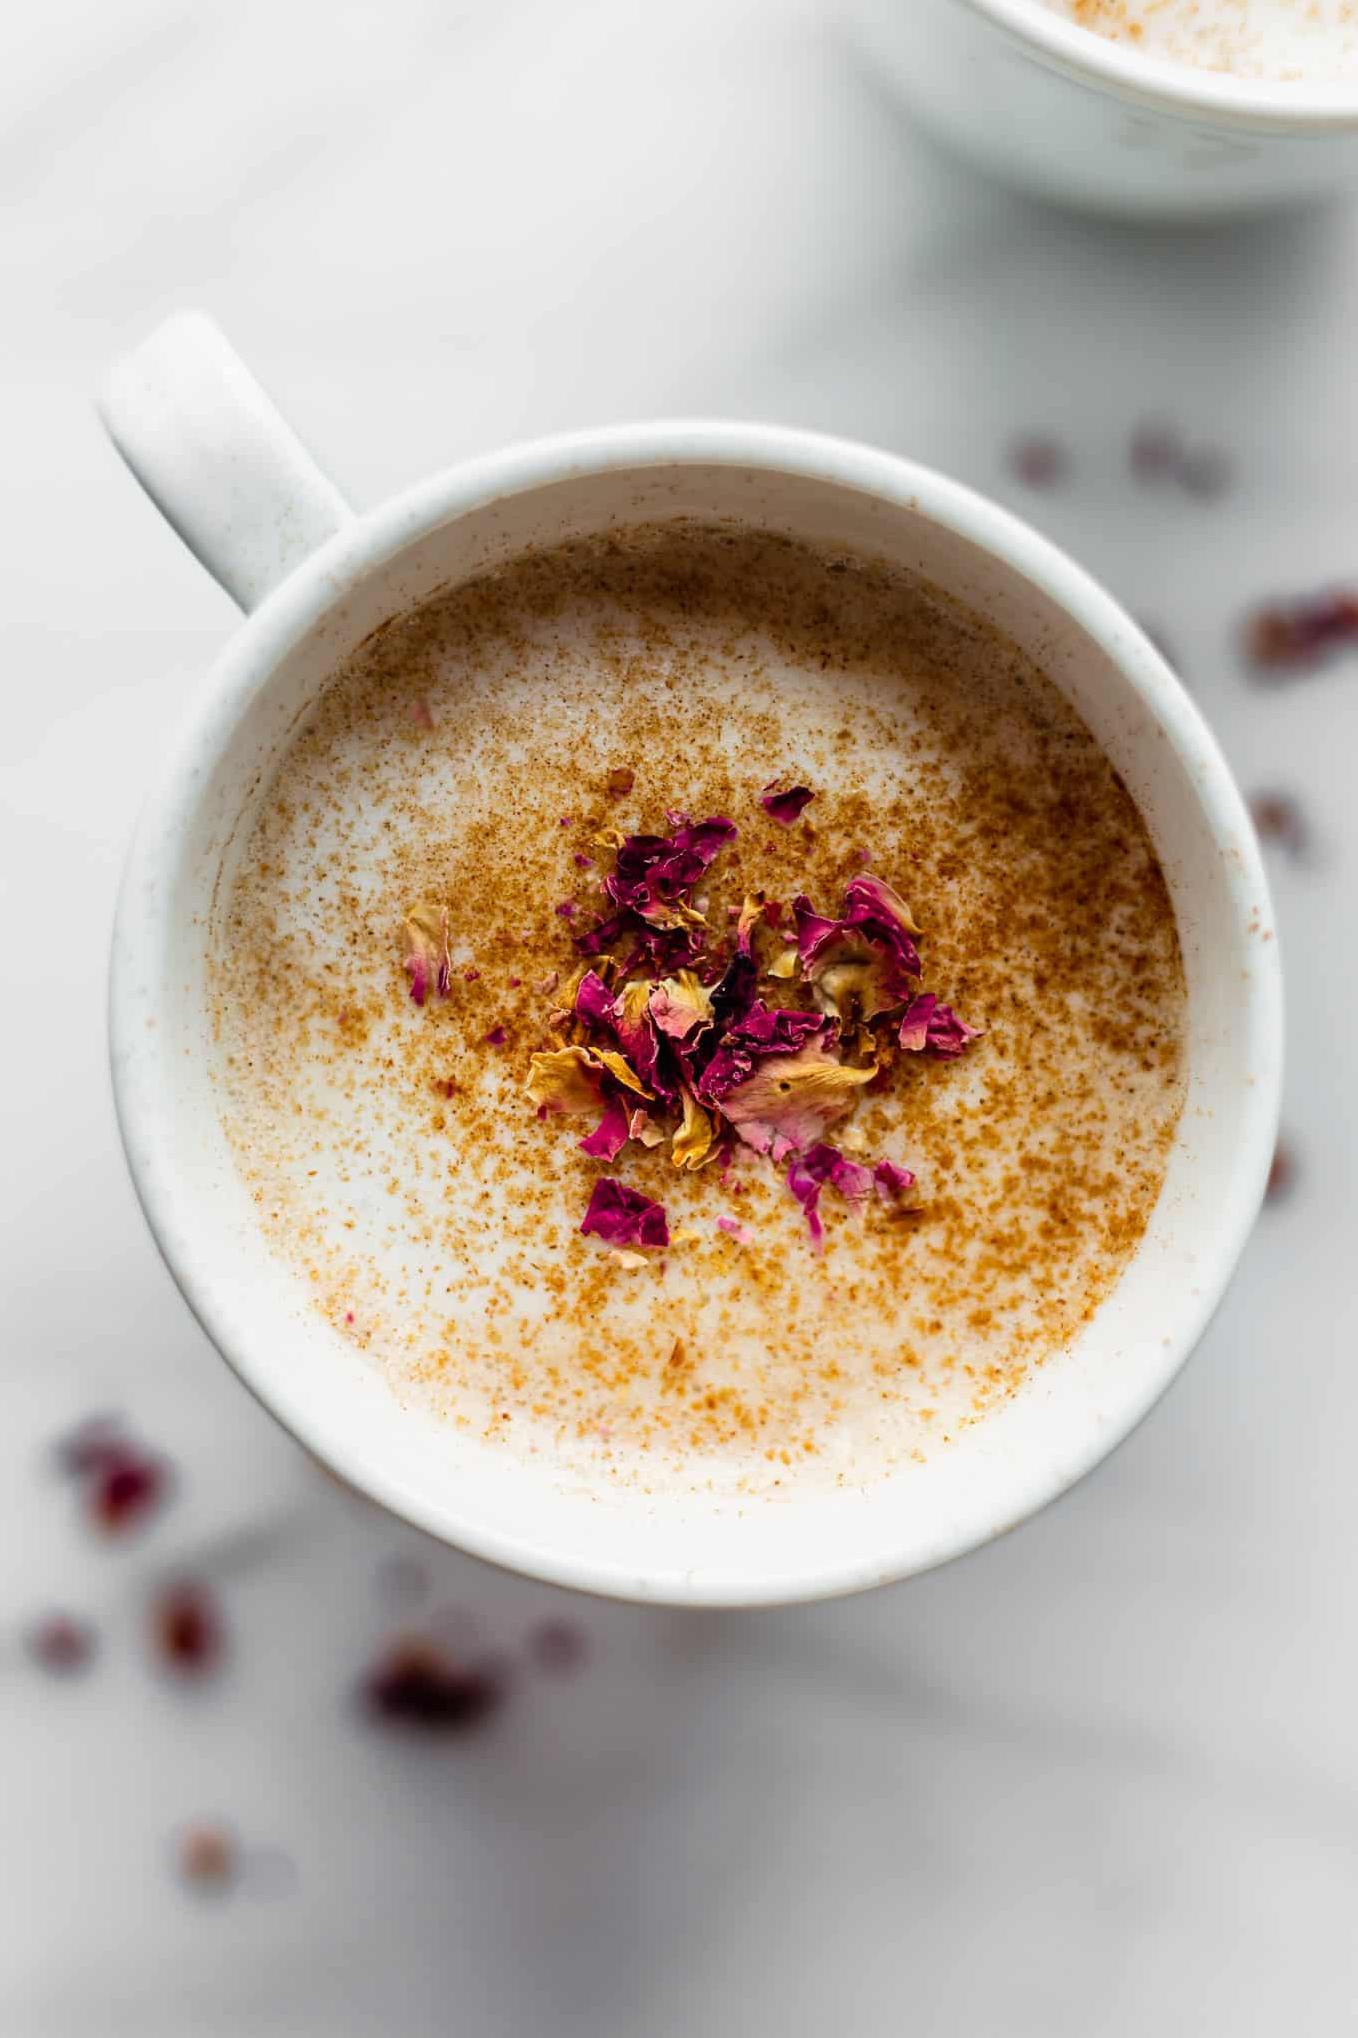  Spices and sweetness blended in a cup.